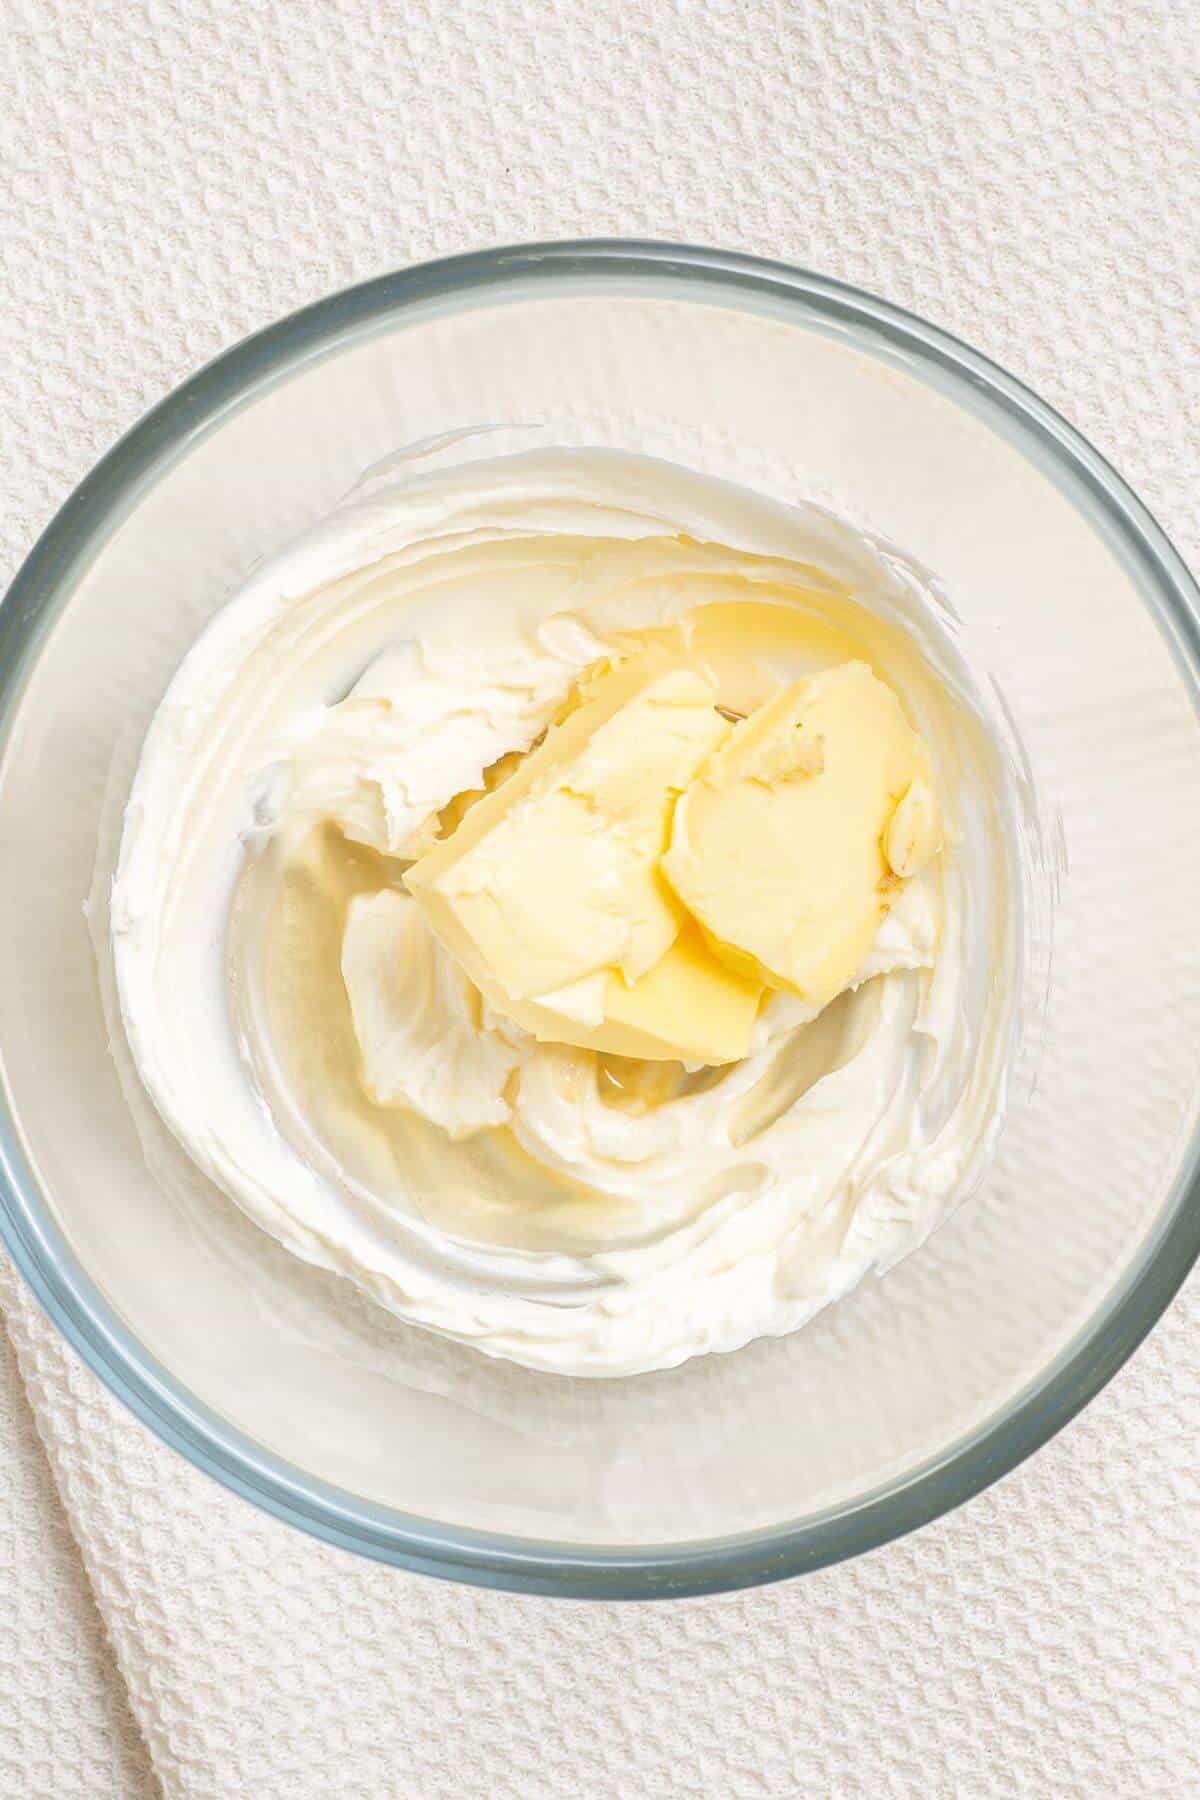 Butter and cream cheese in mixing bowl.